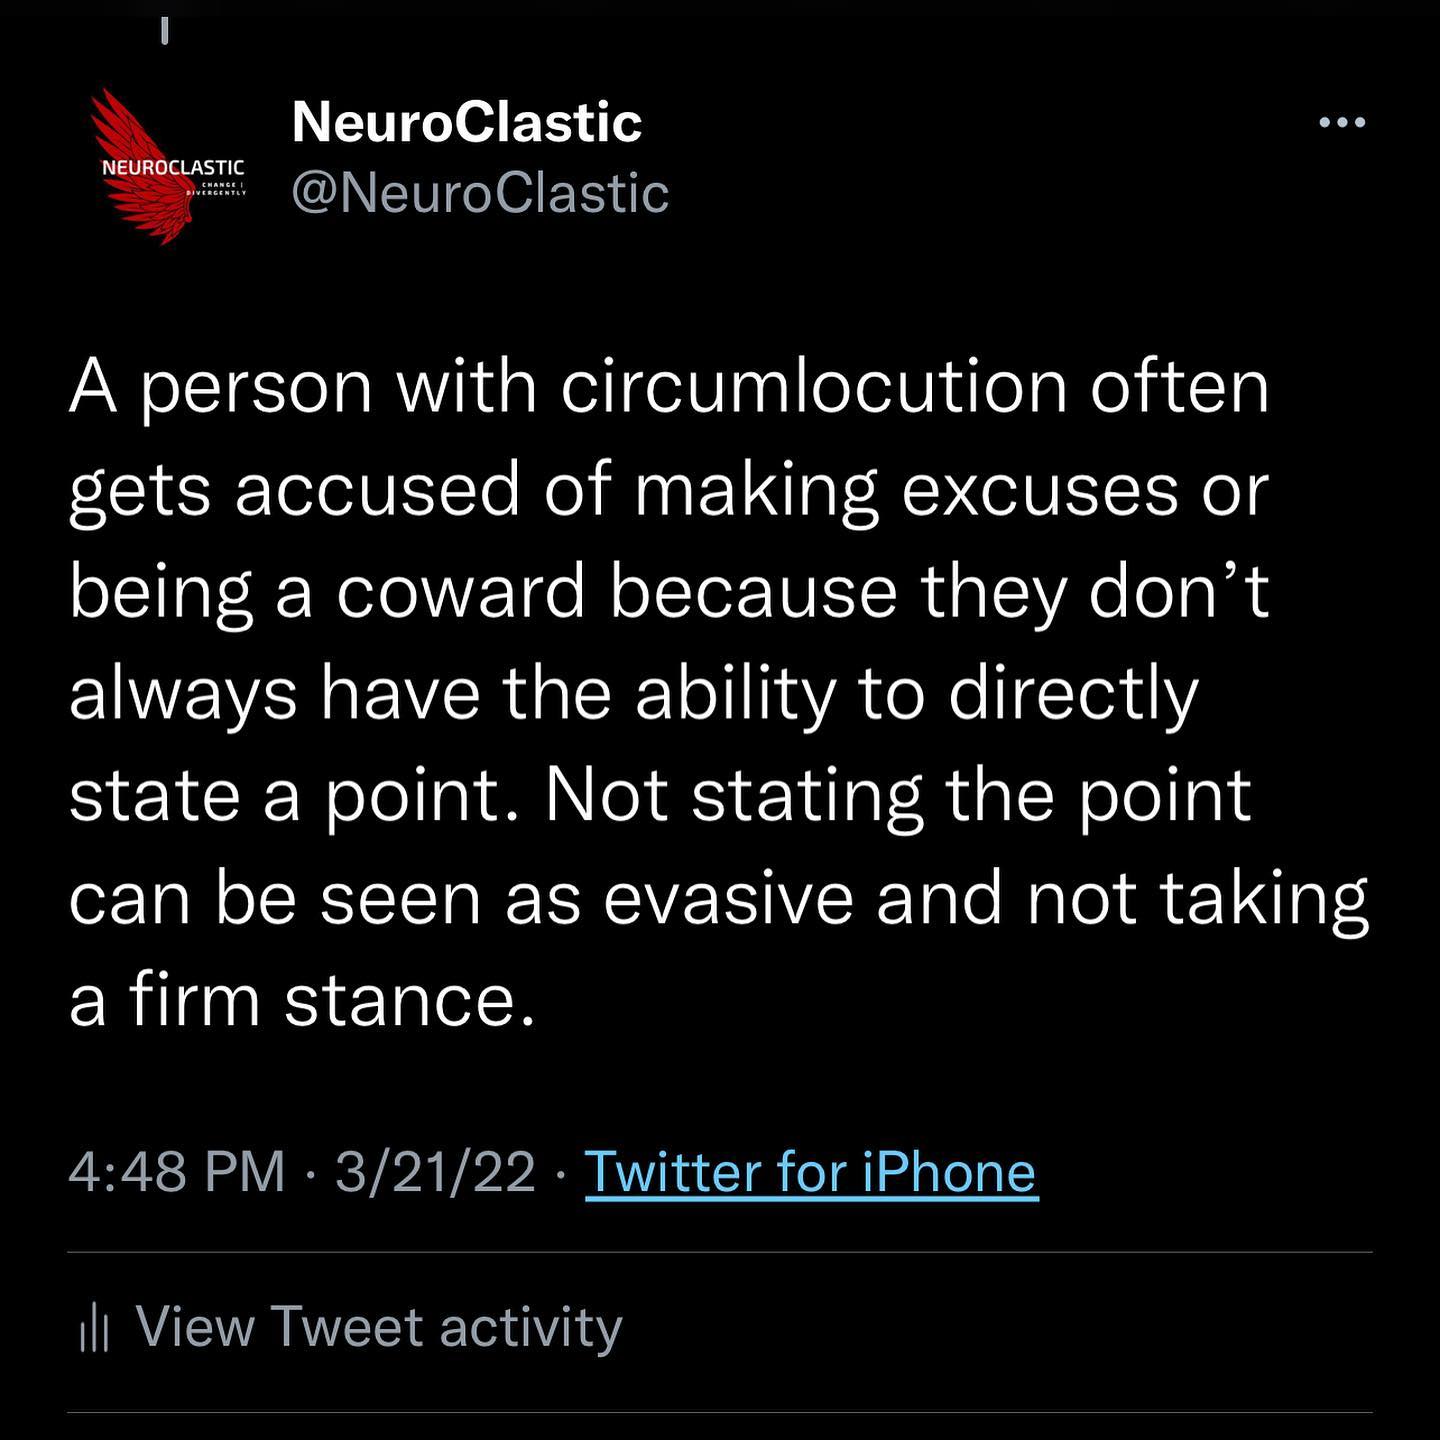 A person with circumlocution often gets accused of making excuses or being a coward because they don’t always have the ability to directly state a point. Not stating the point can be seen as evasive and not taking a firm stance.